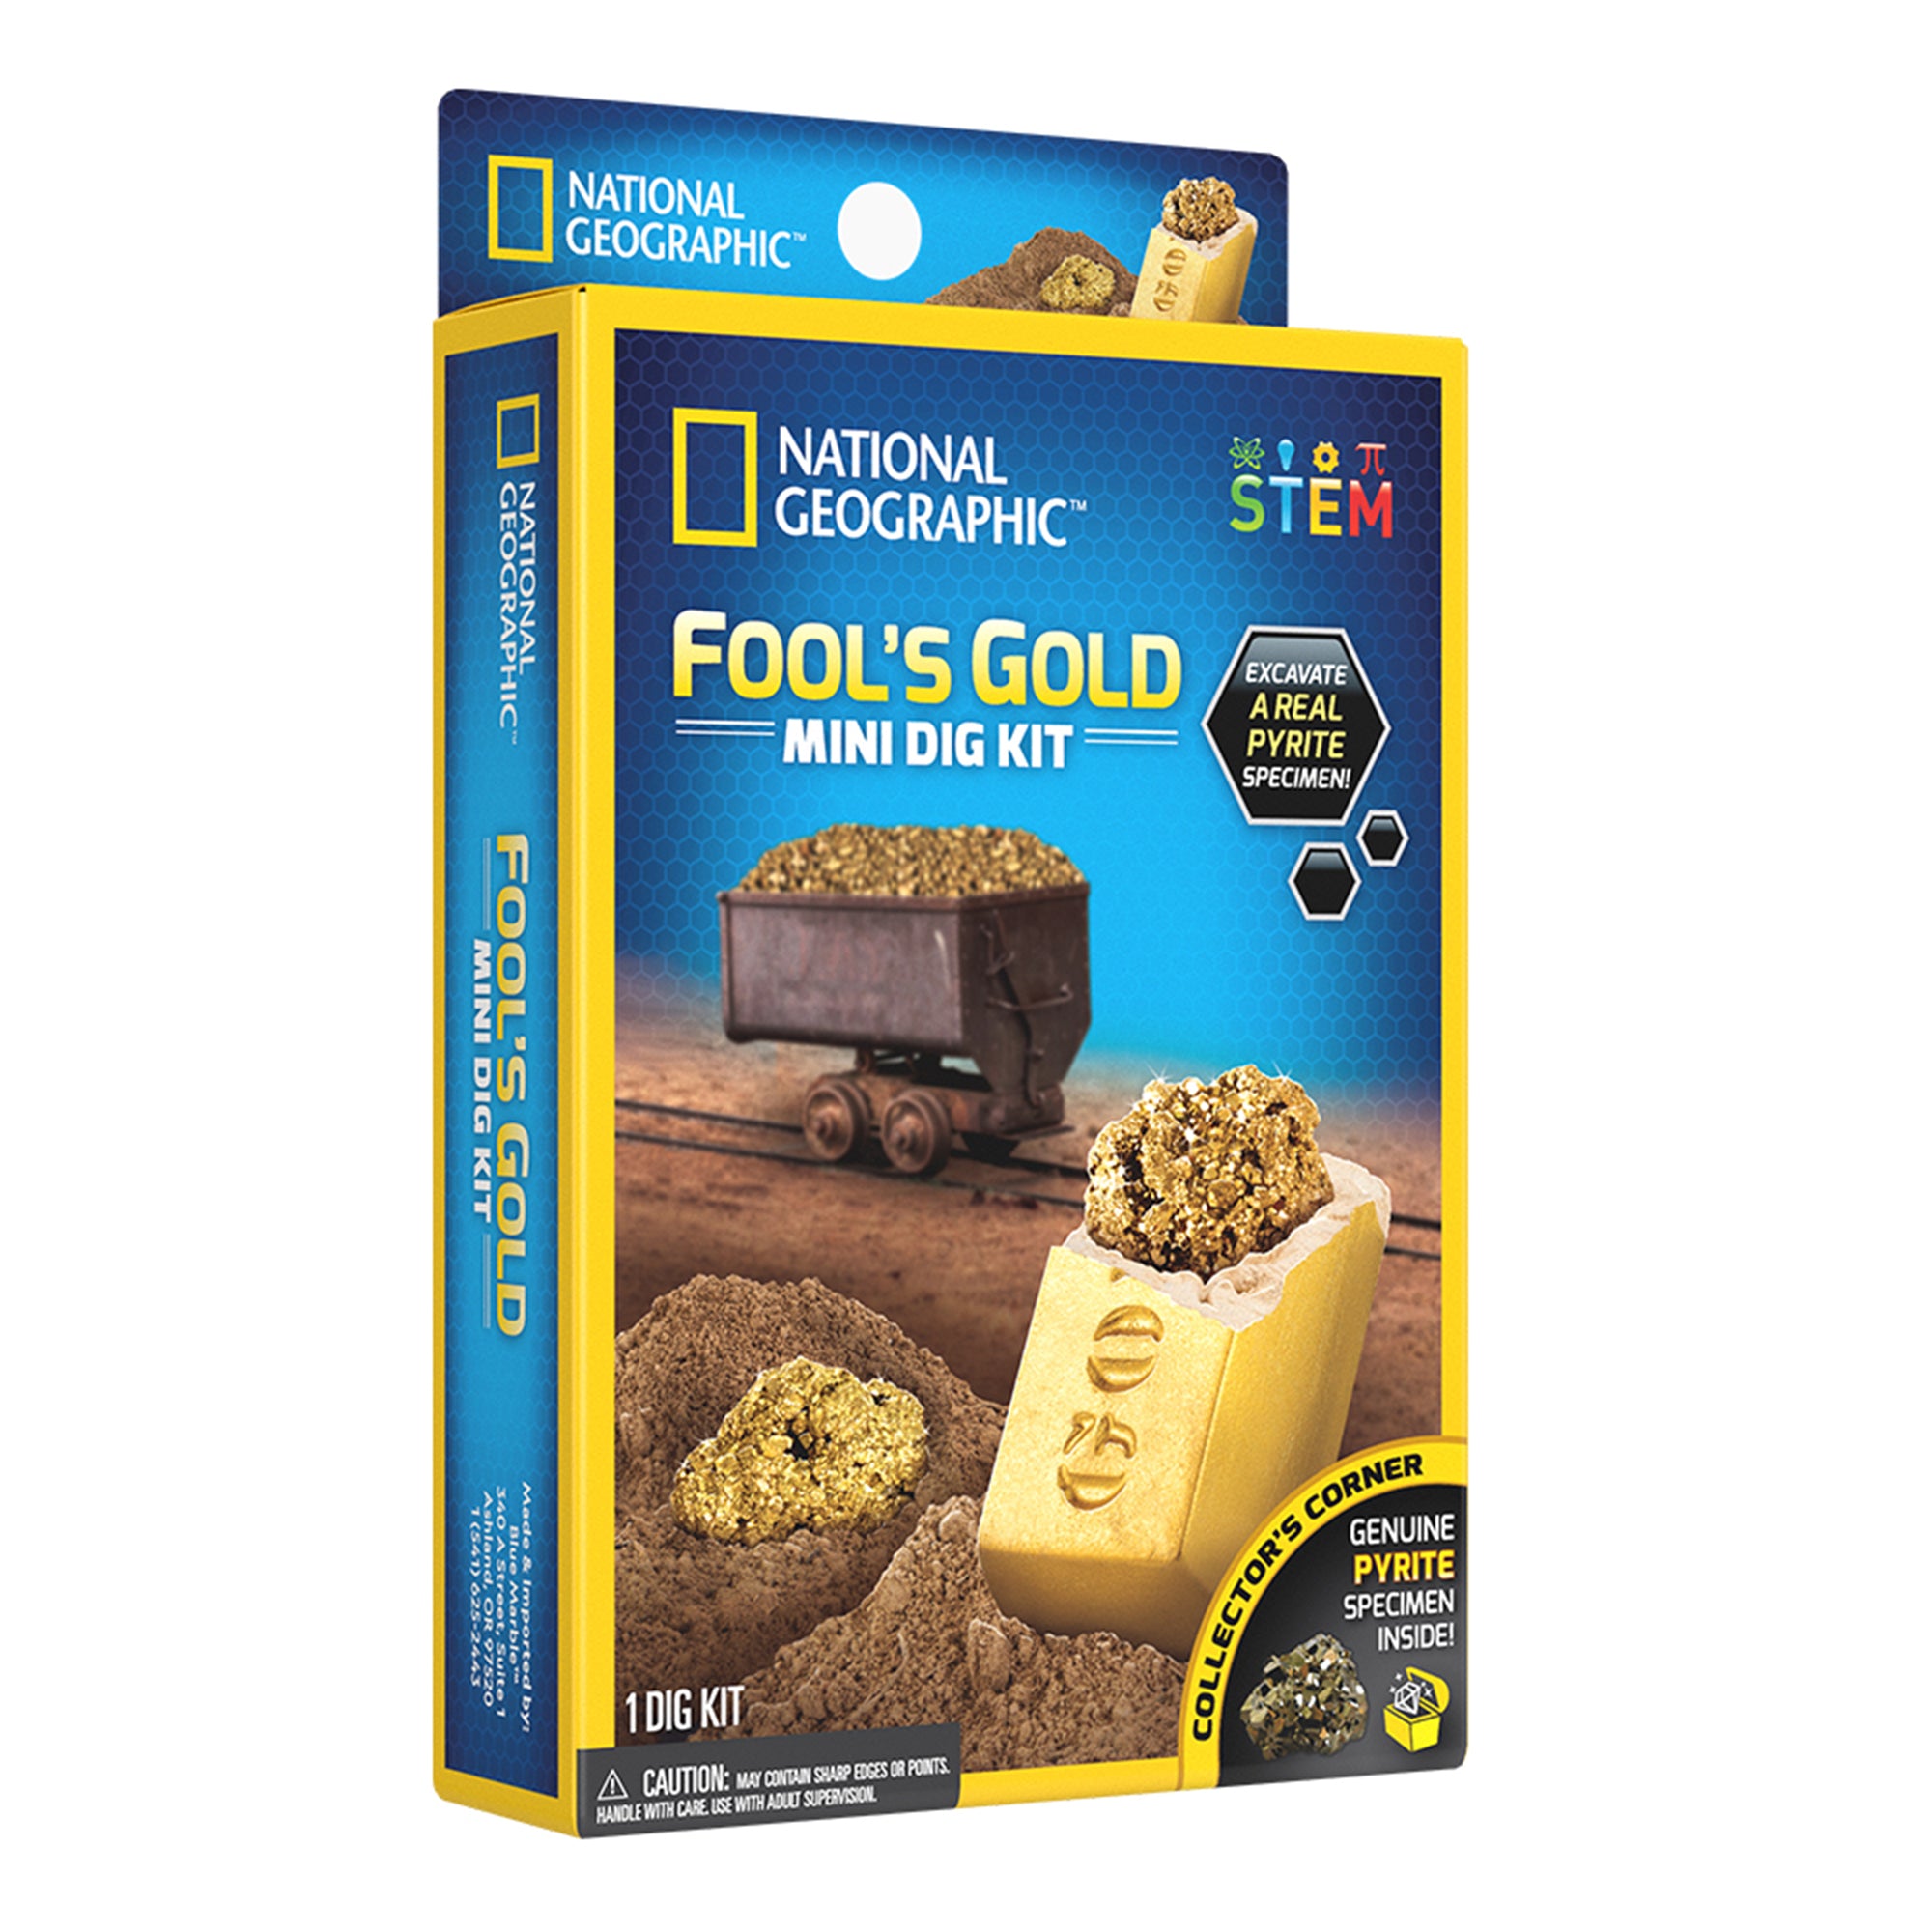 NATIONAL GEOGRAPHIC FOOLS GOLD MINI DIG KIT